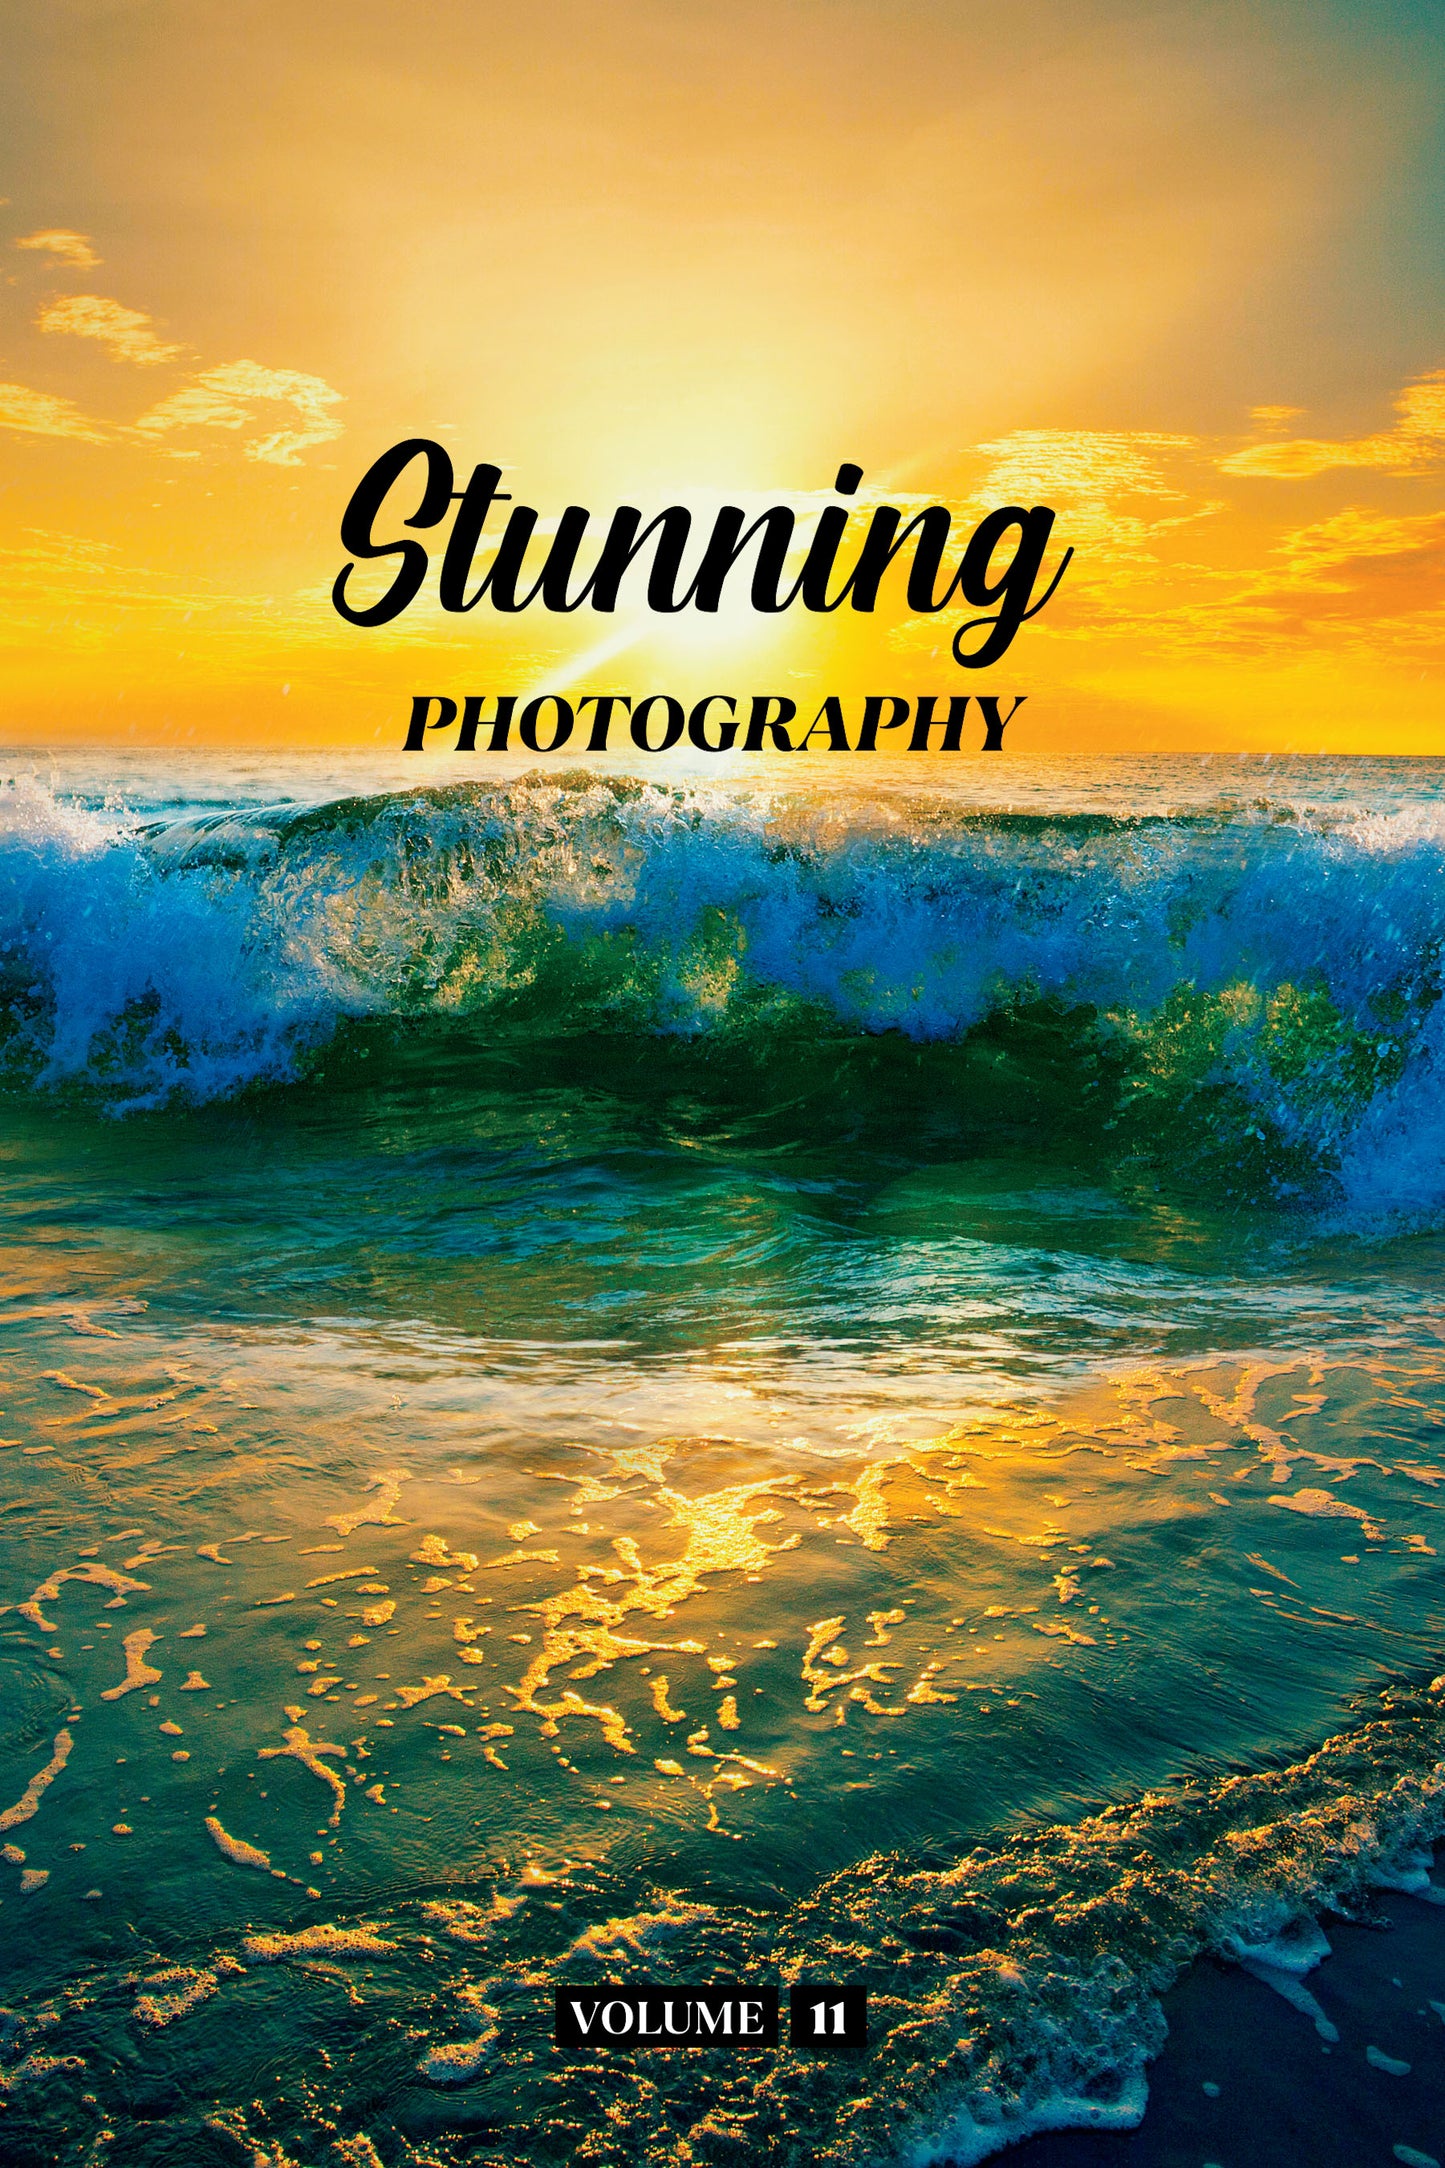 Stunning Photography Volume 11 (Physical Book)